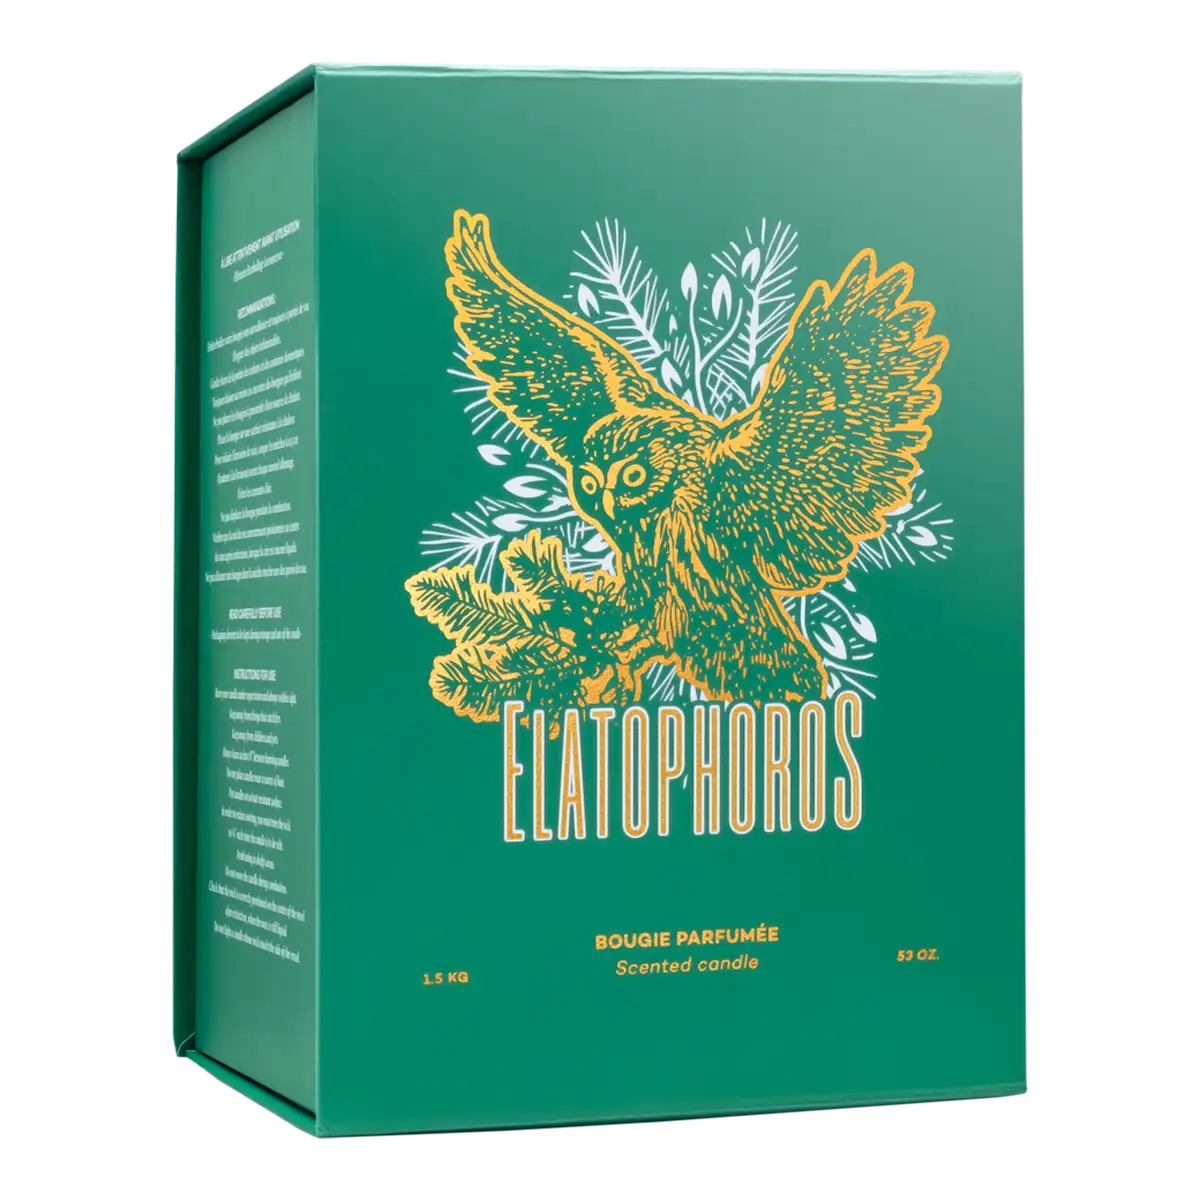 ELATOPHOROS Scented Candle 1,5kg (2023 Edition)